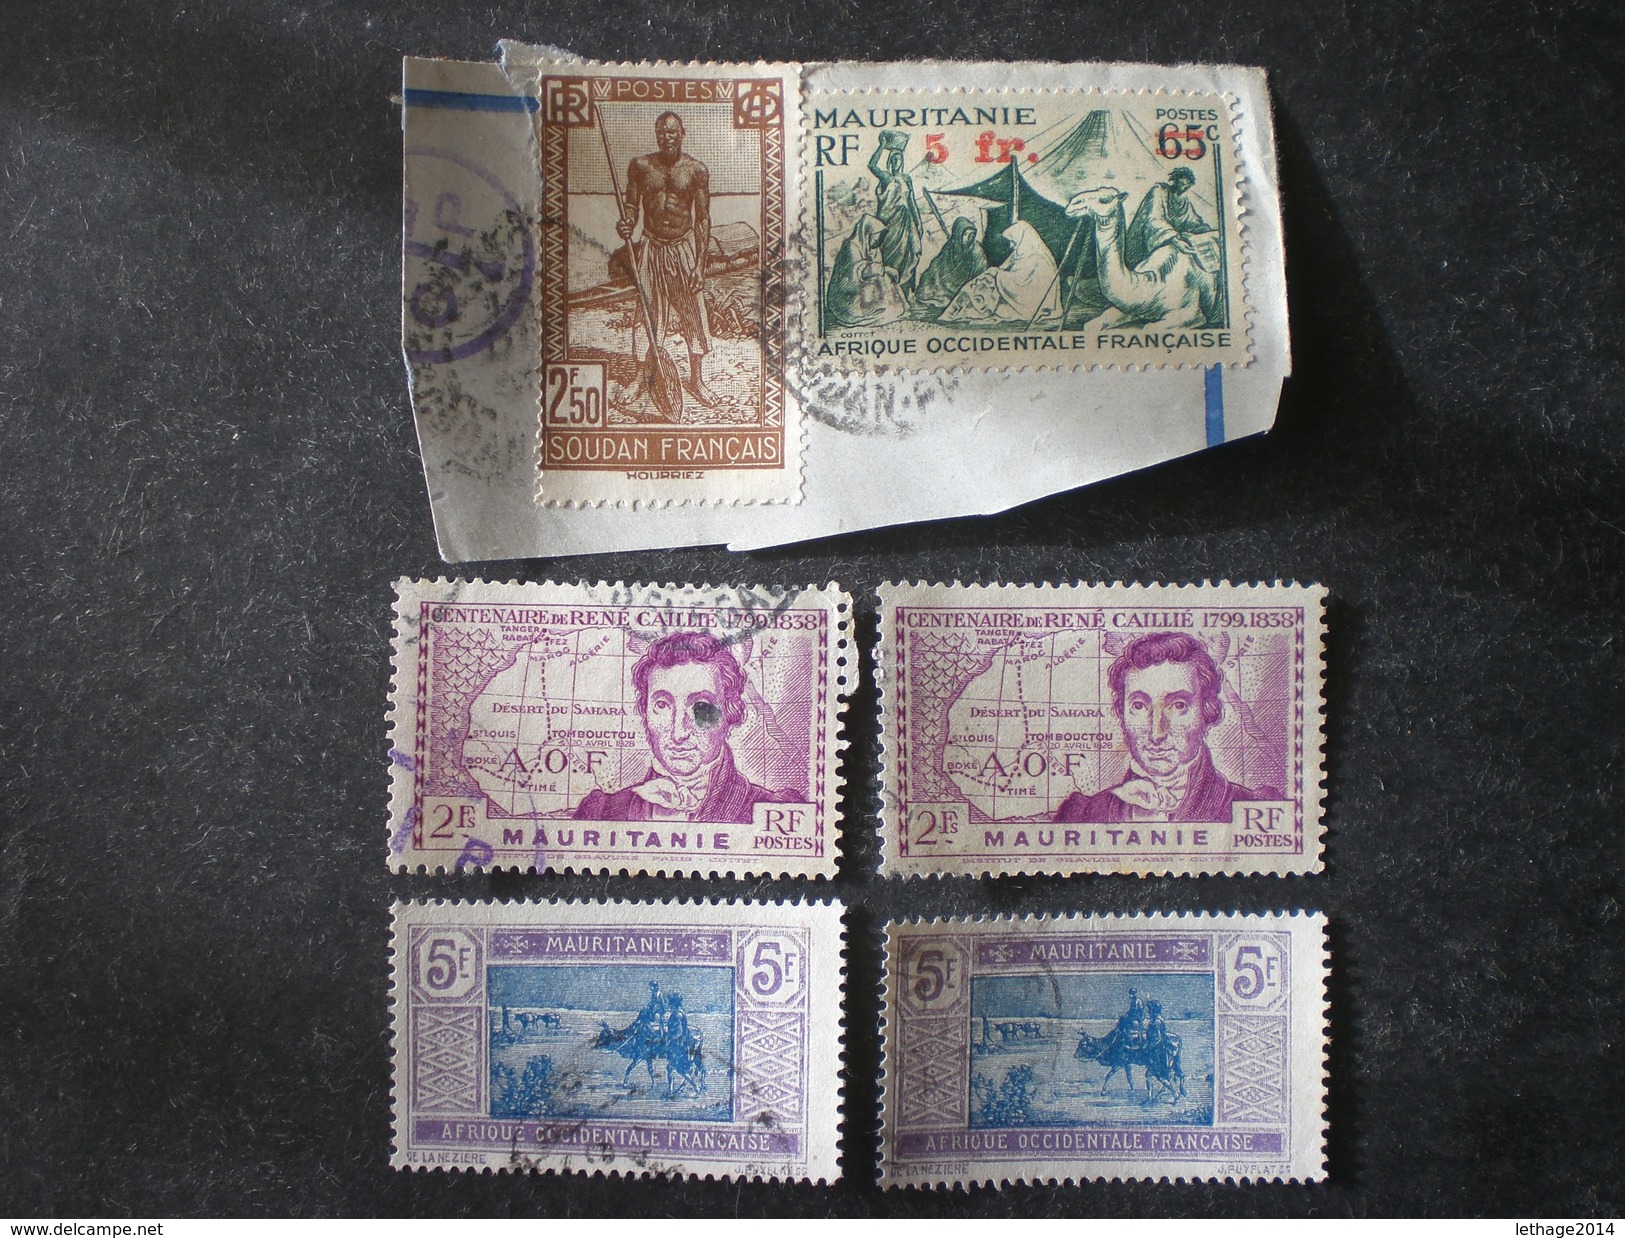 AOF MAURITANIA MAURITANIE موريتانيا Mauritanië 1944 Issues Of 1938 And 1939 Surcharged  + 1906 CAMEL - Usati